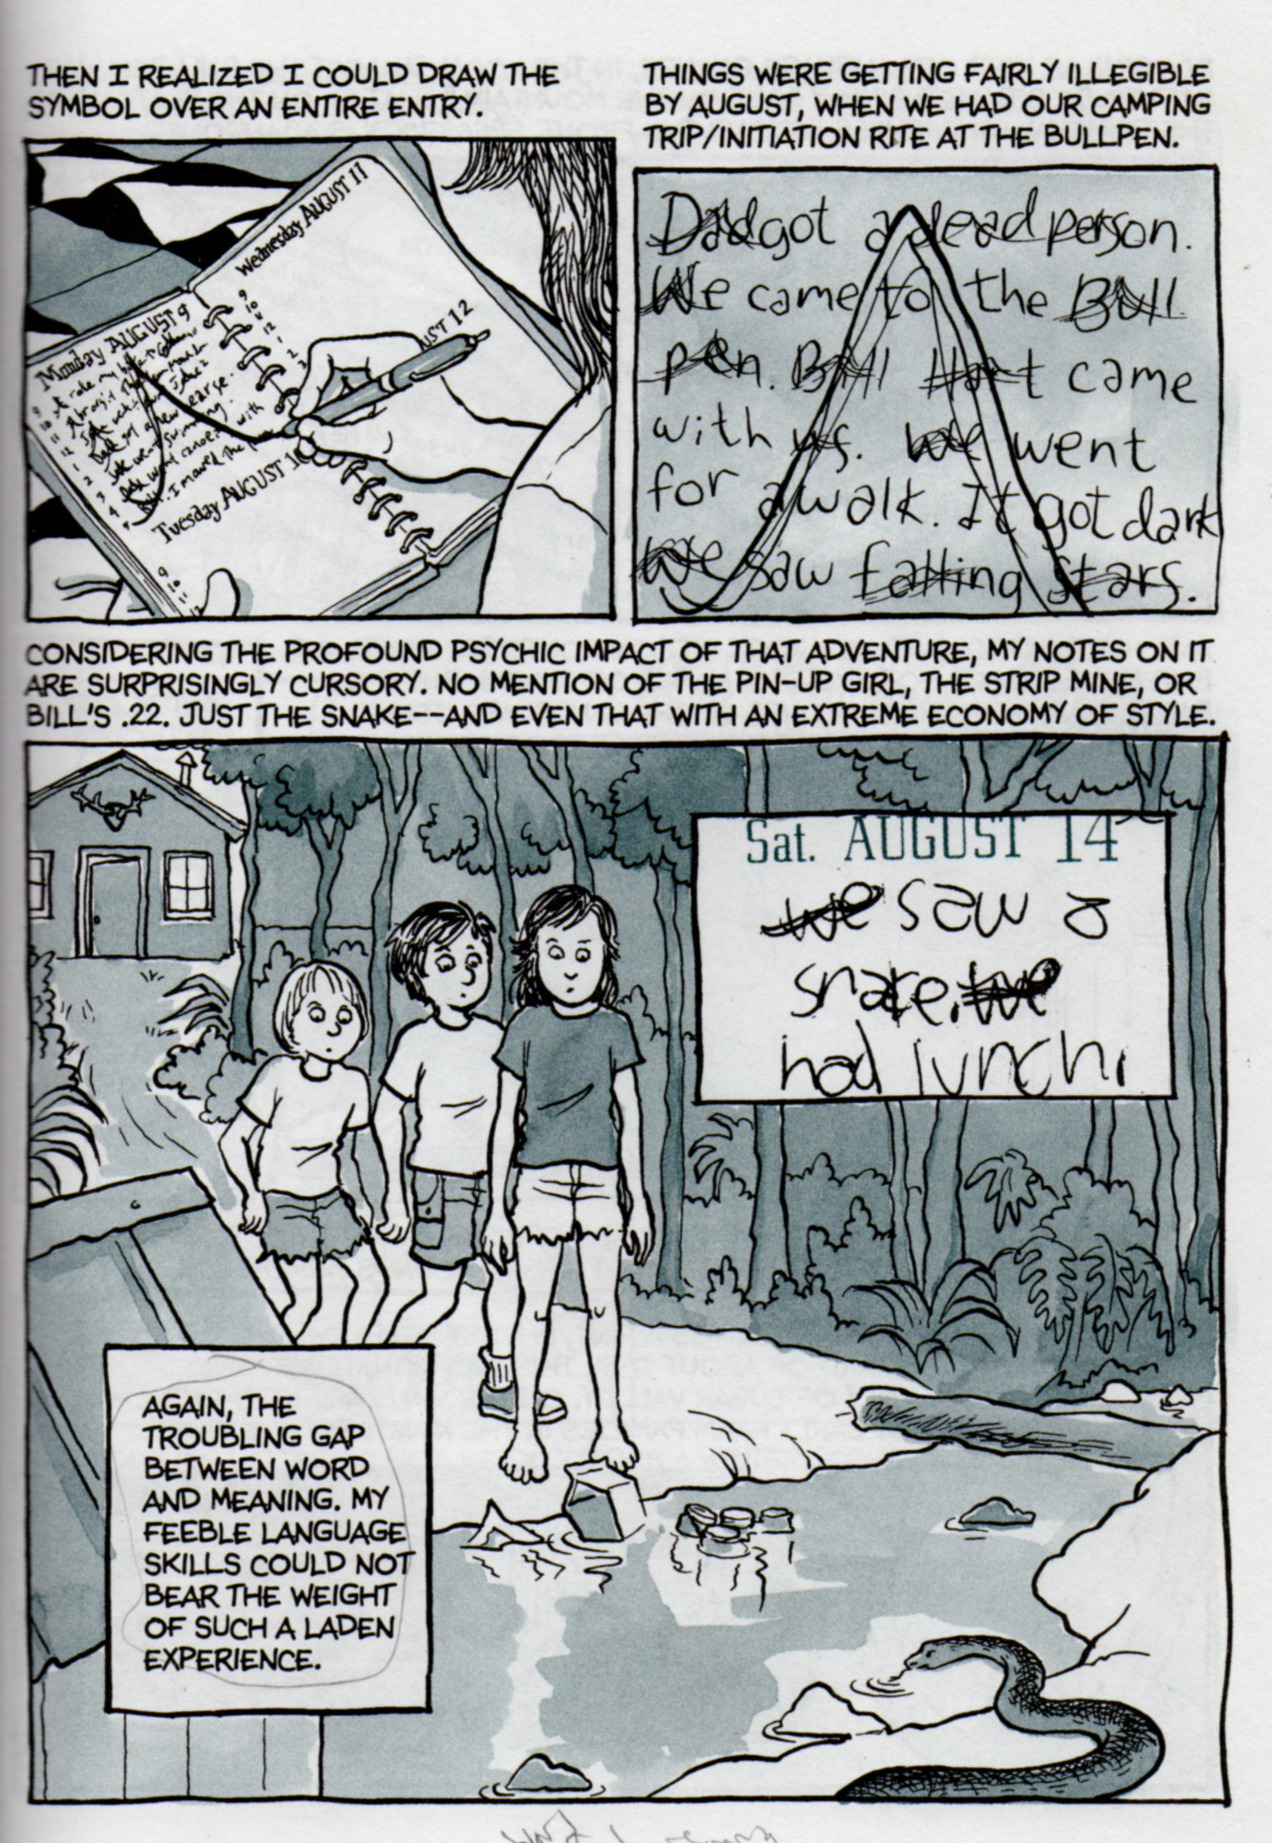 Our Comics, Ourselves — Alison Bechdel's “Fun Home”